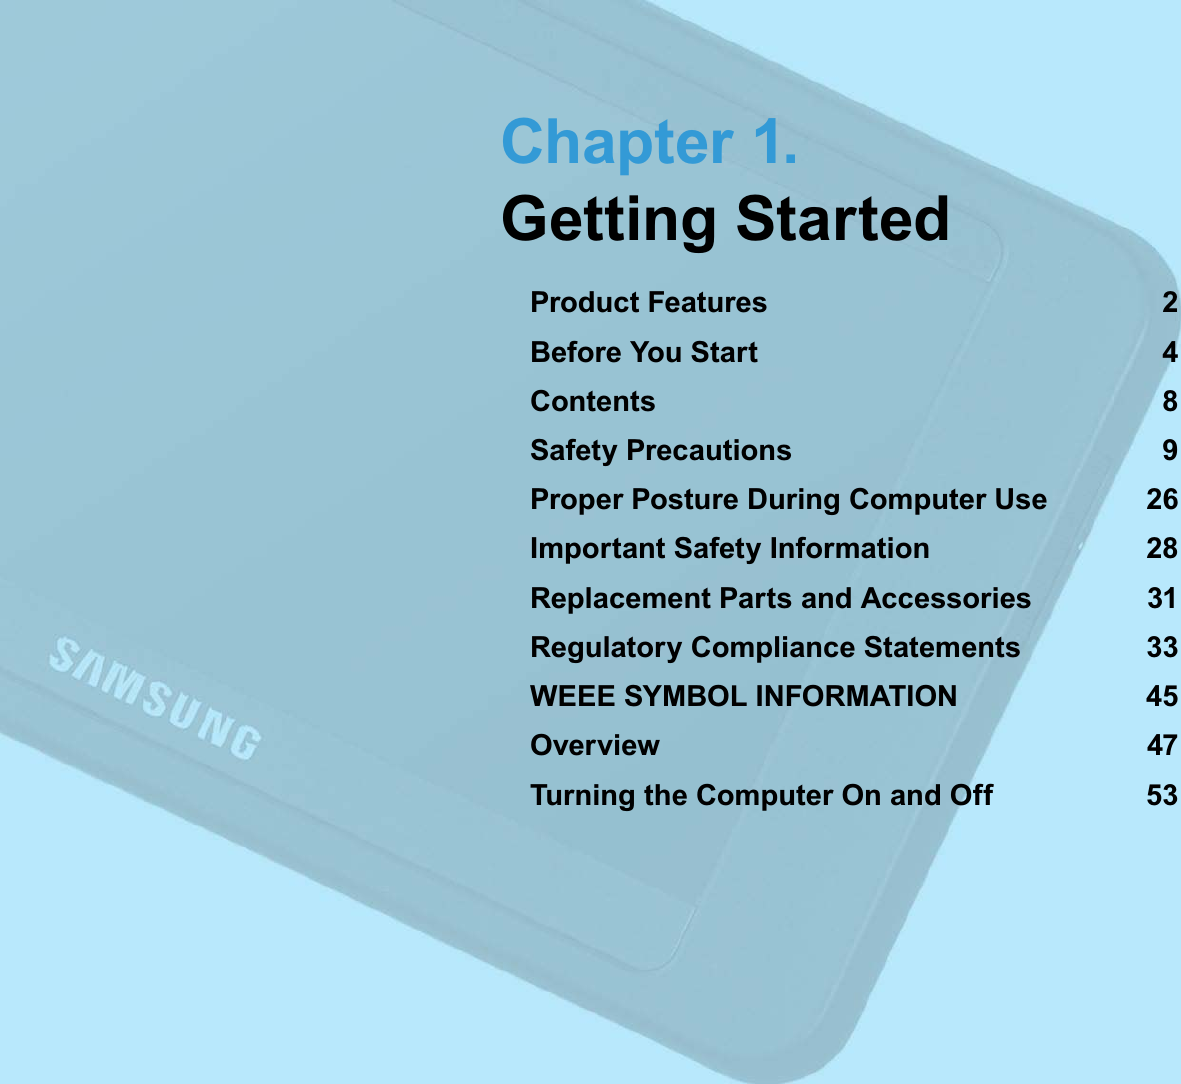 Chapter 1.Getting StartedProduct Features 2Before You Start 4Contents 8Safety Precautions 9Proper Posture During Computer Use 26Important Safety Information 28Replacement Parts and Accessories 31Regulatory Compliance Statements 33WEEE SYMBOL INFORMATION 45Overview 47Turning the Computer On and Off 53